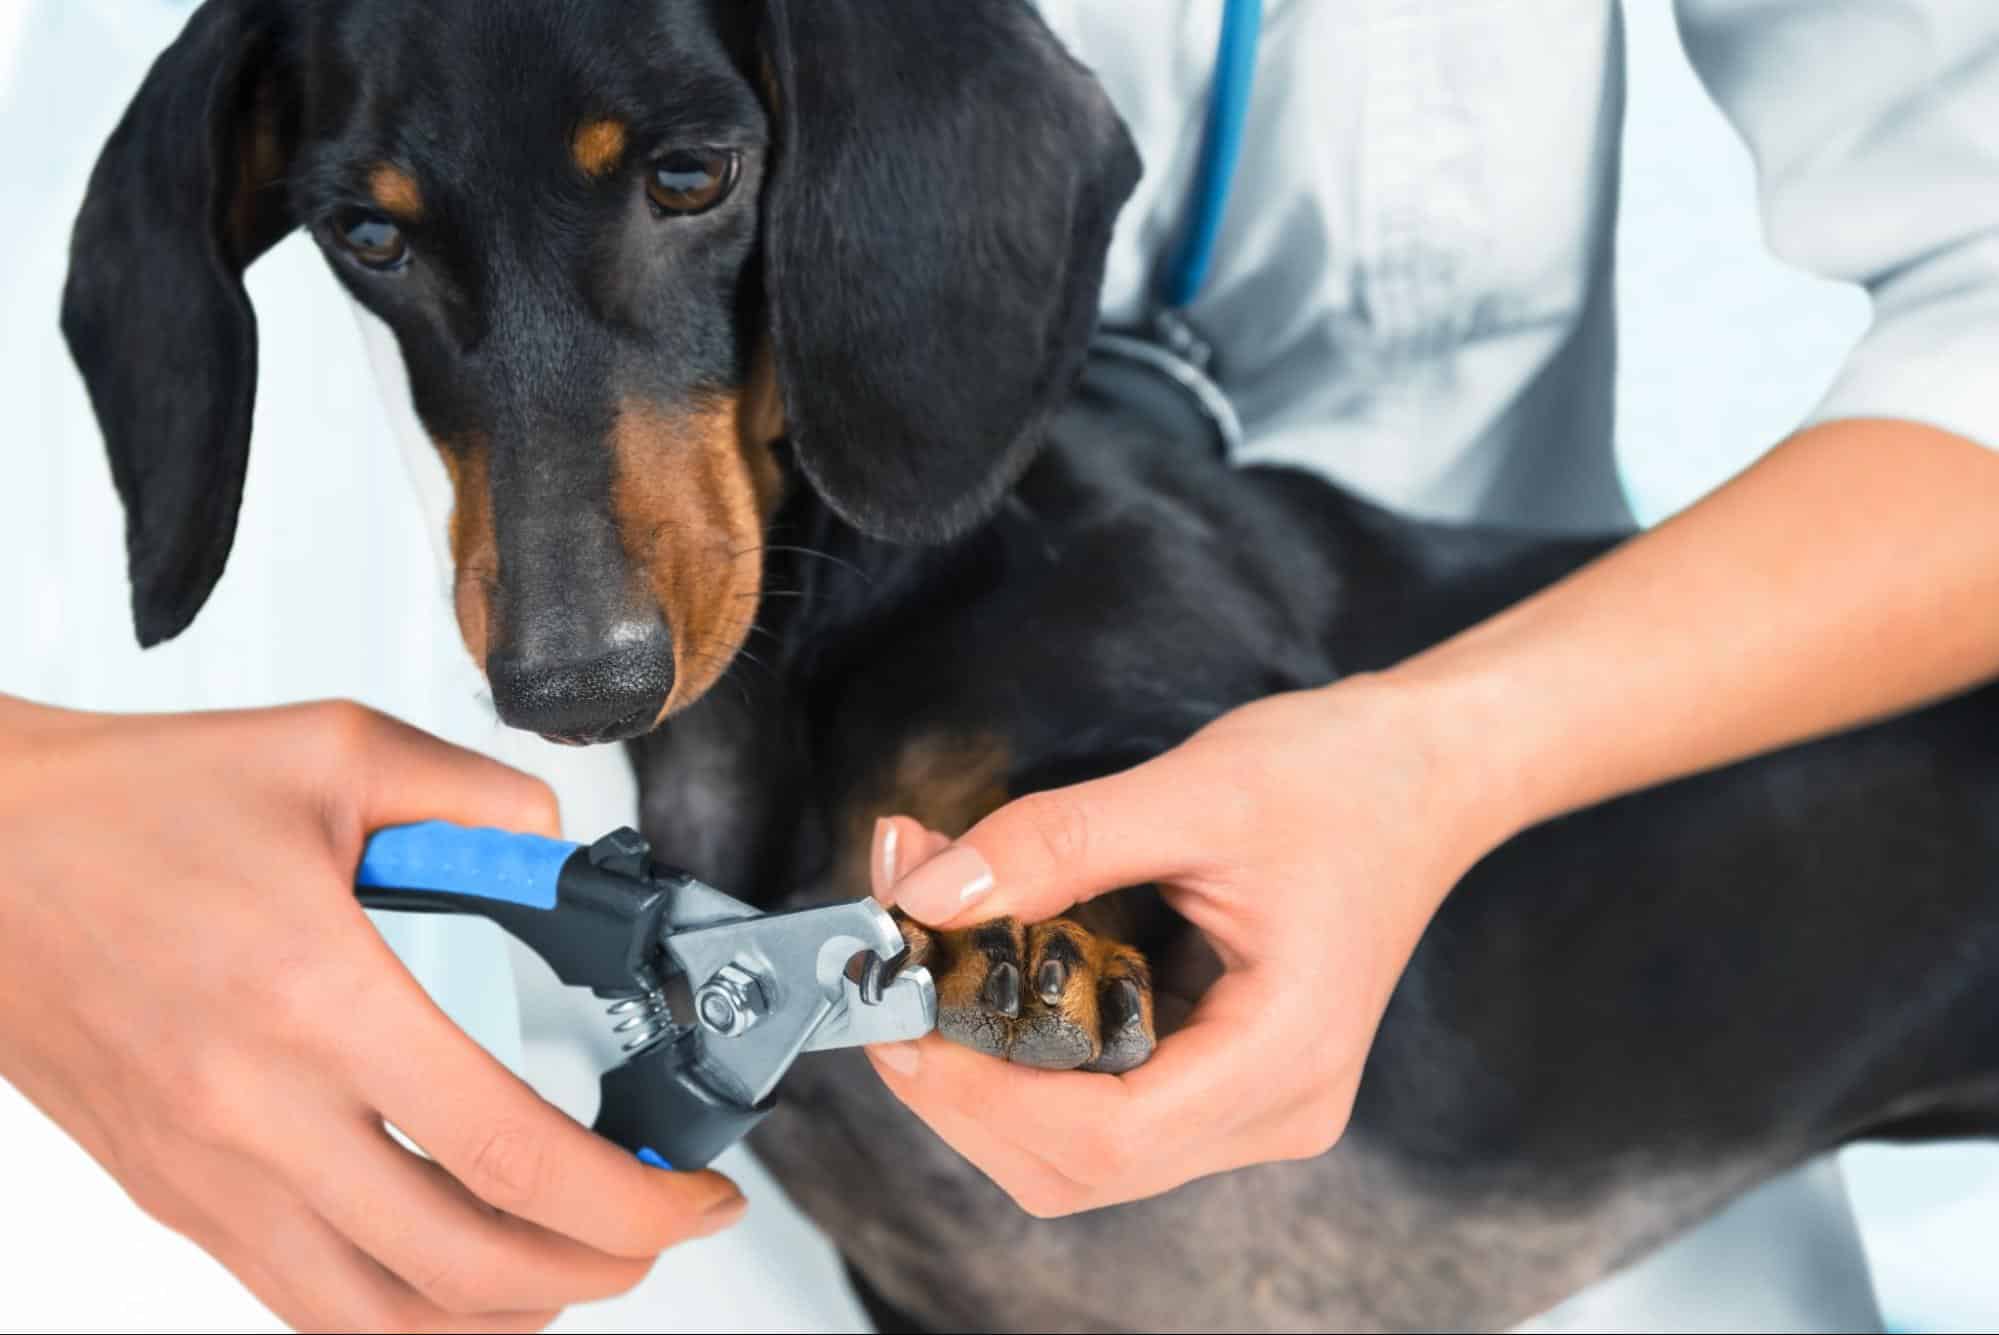 A veterinarian carefully trims a dachshund’s toenail to prevent them from getting caught. The pet owner watches to learn how to do at home.